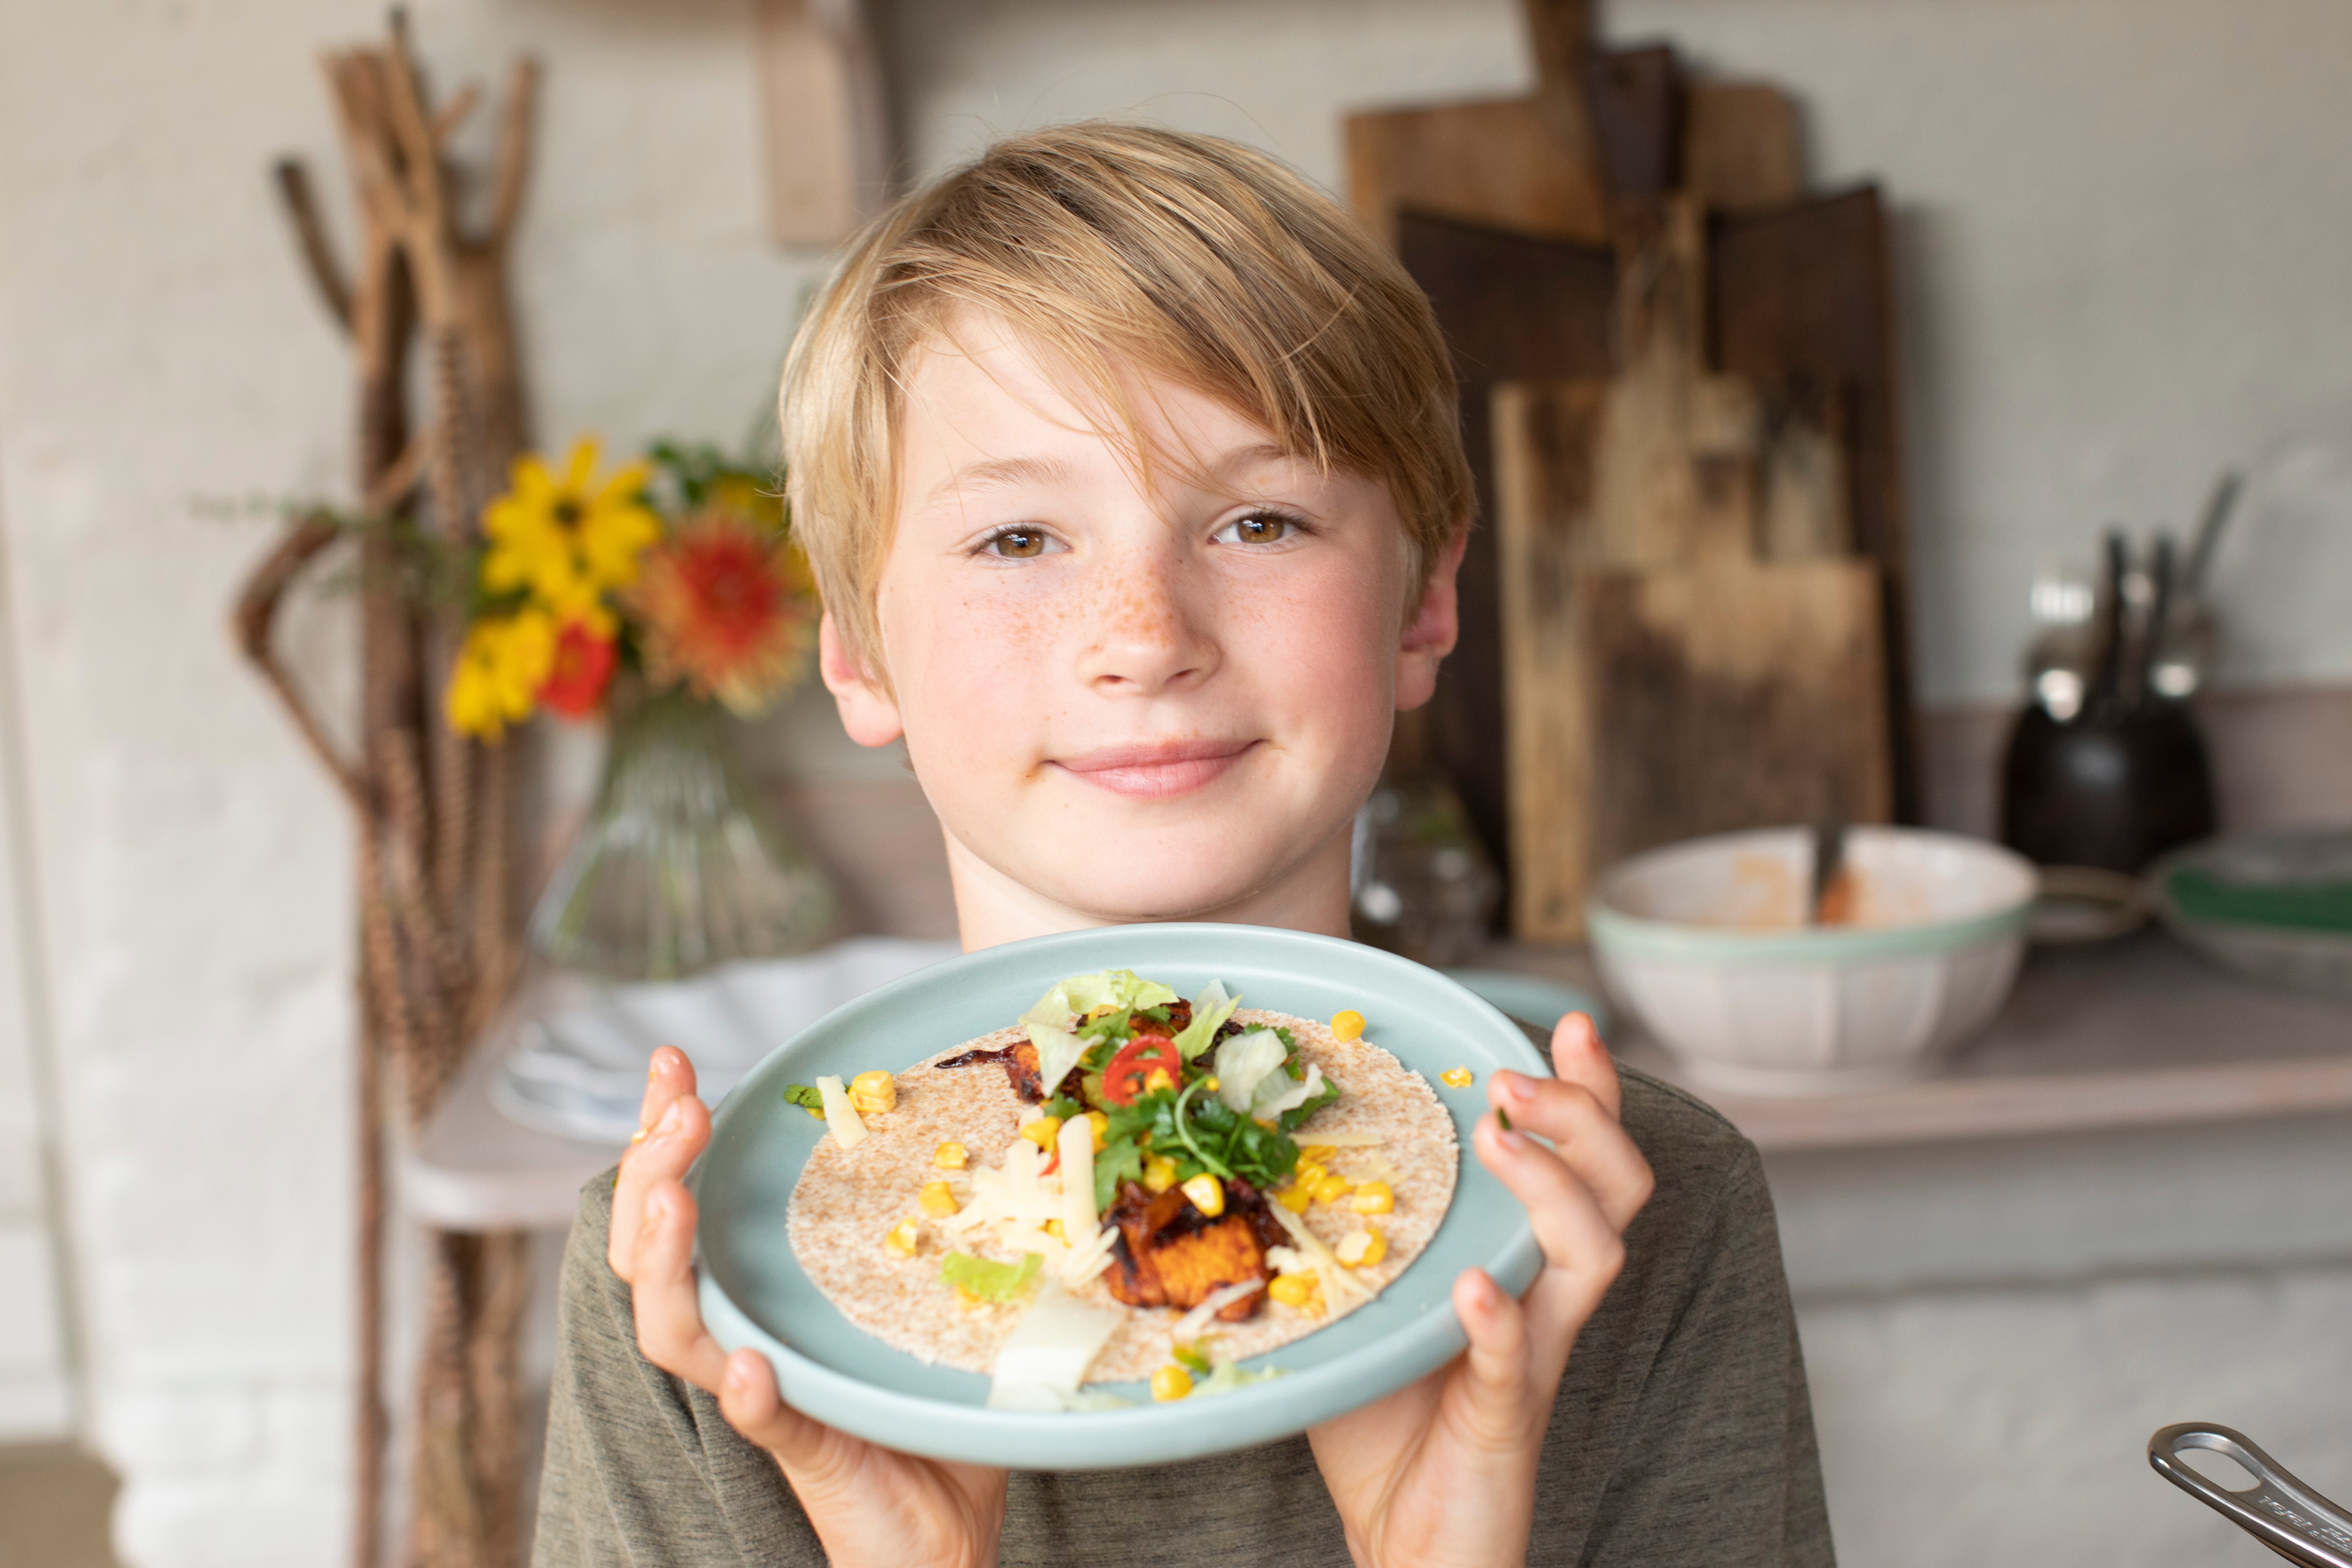 Jamie Olivers 12-year-old son Buddy lands own BBC cooking show after chef rejects nepo baby suggestion The Independent